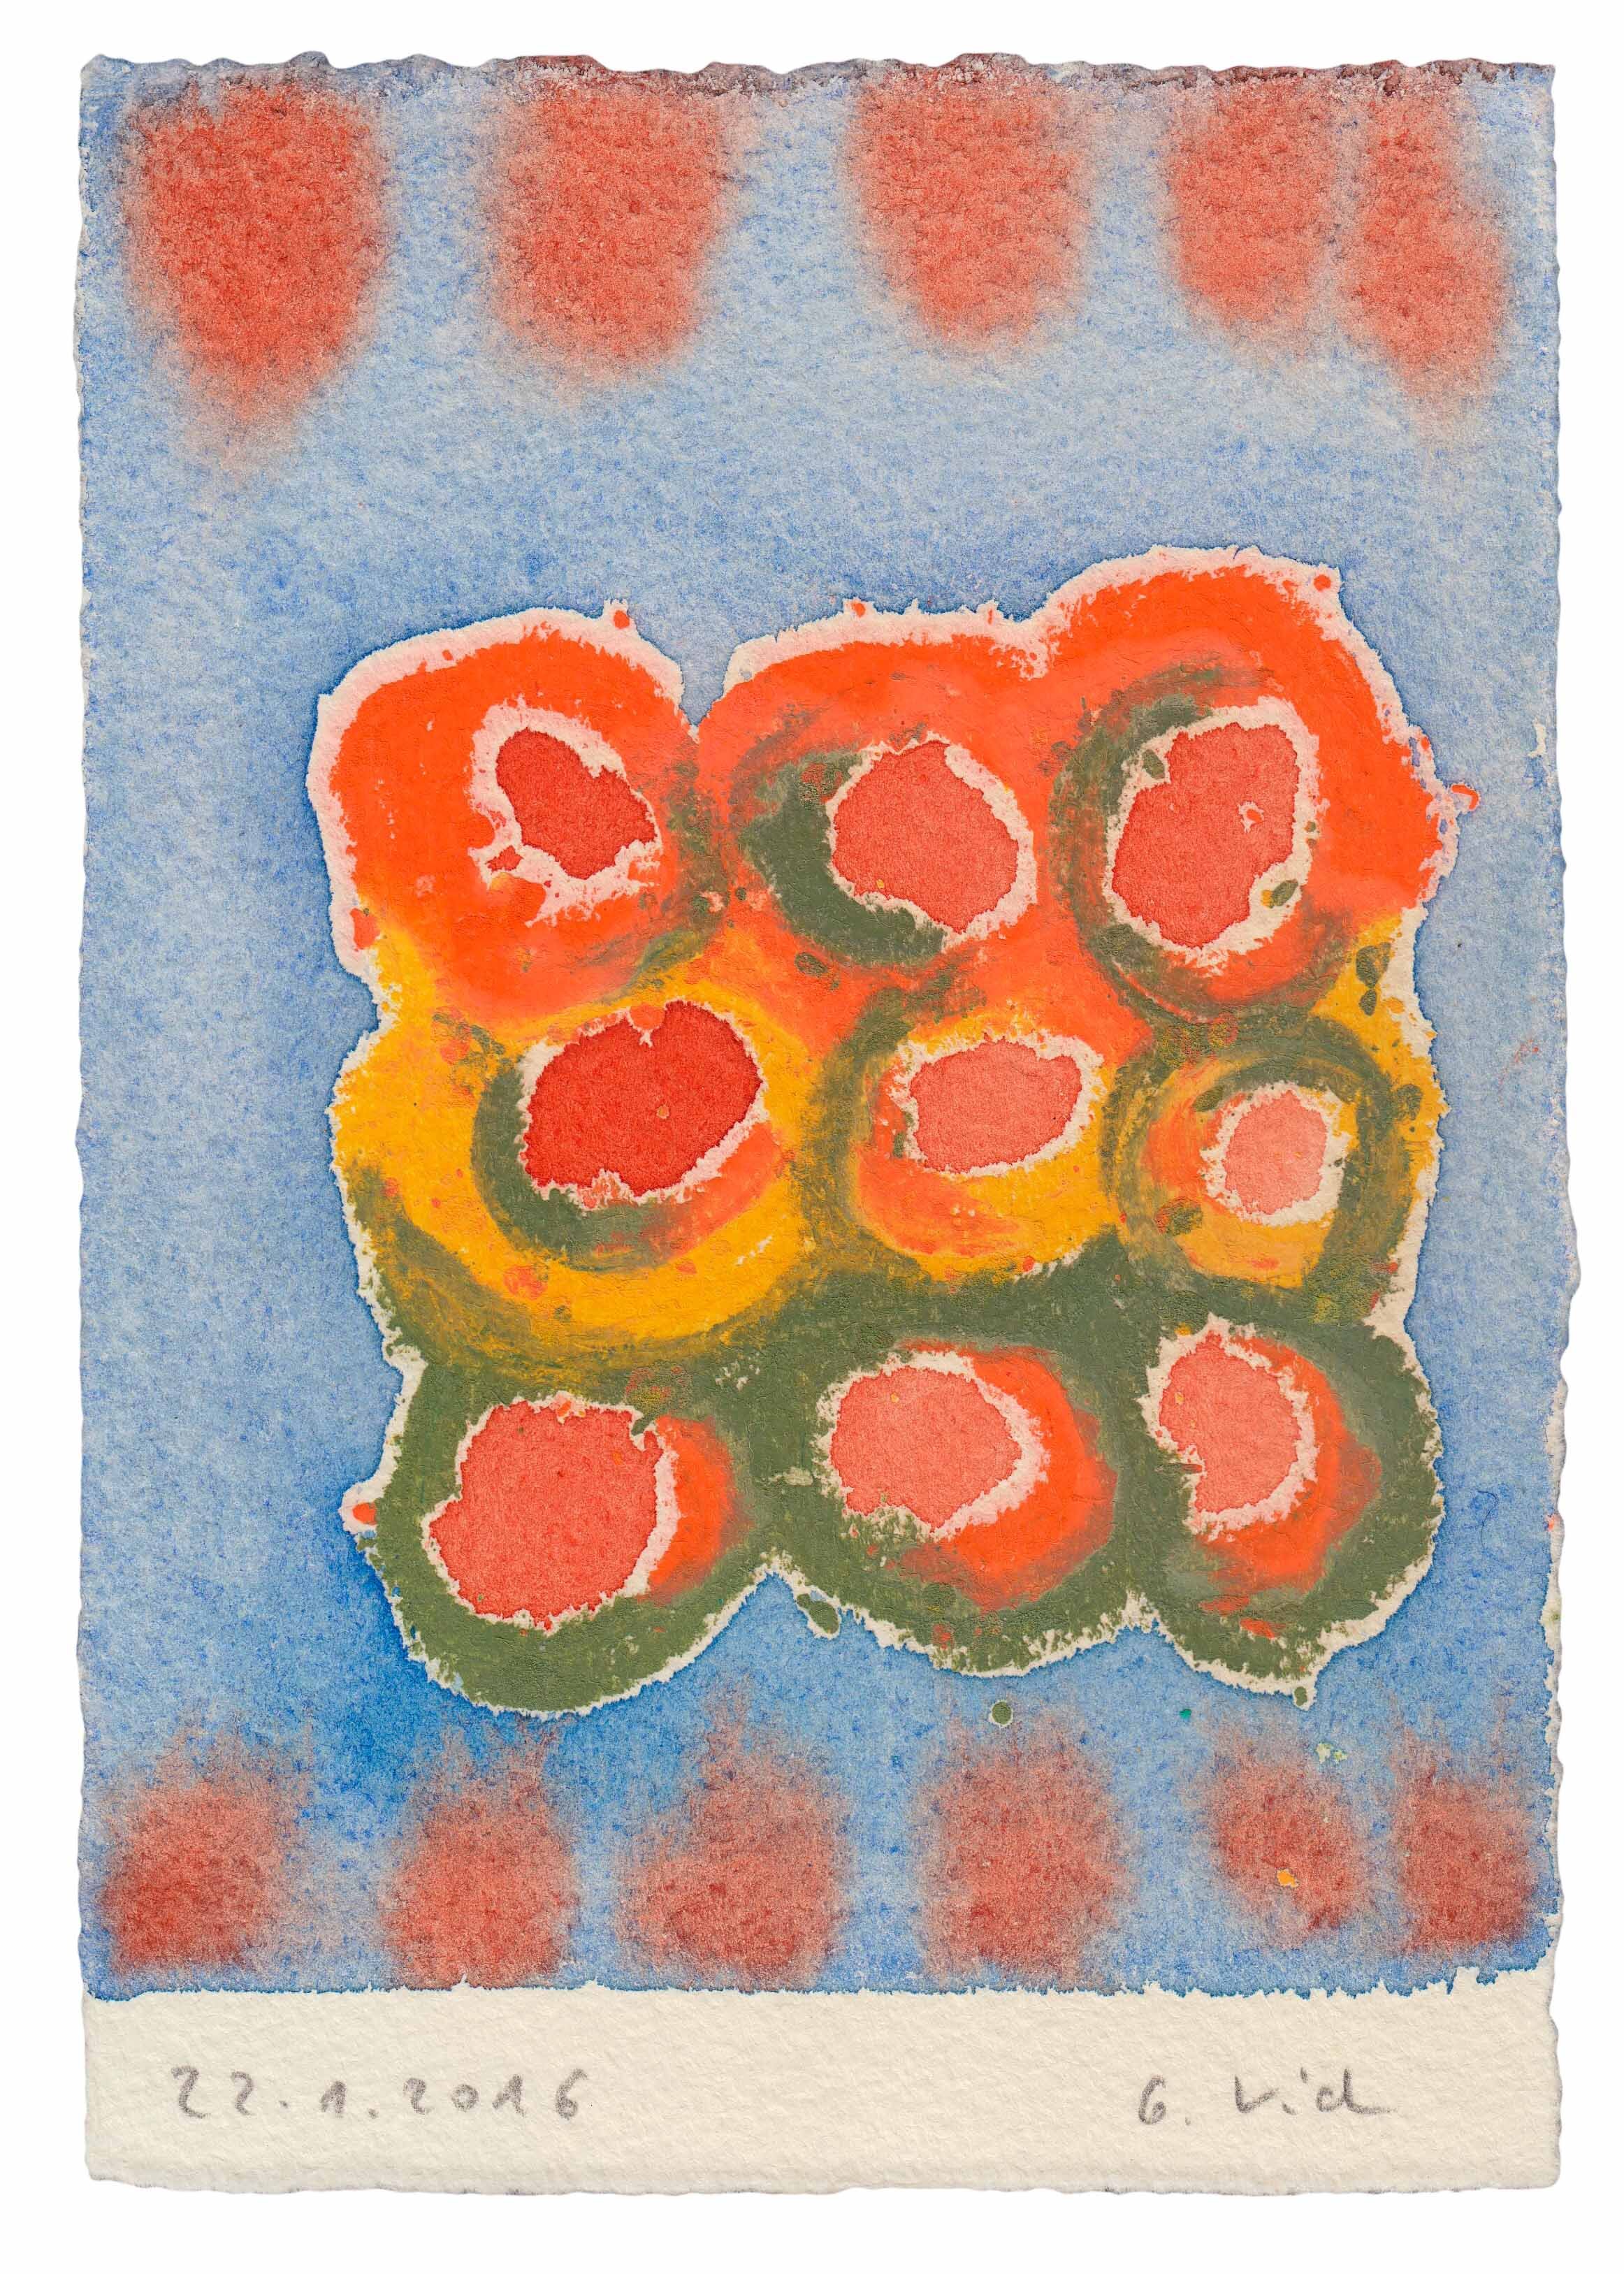  13 × 9 cm, Oil-pastel and Aquarell on Paper, 2016 